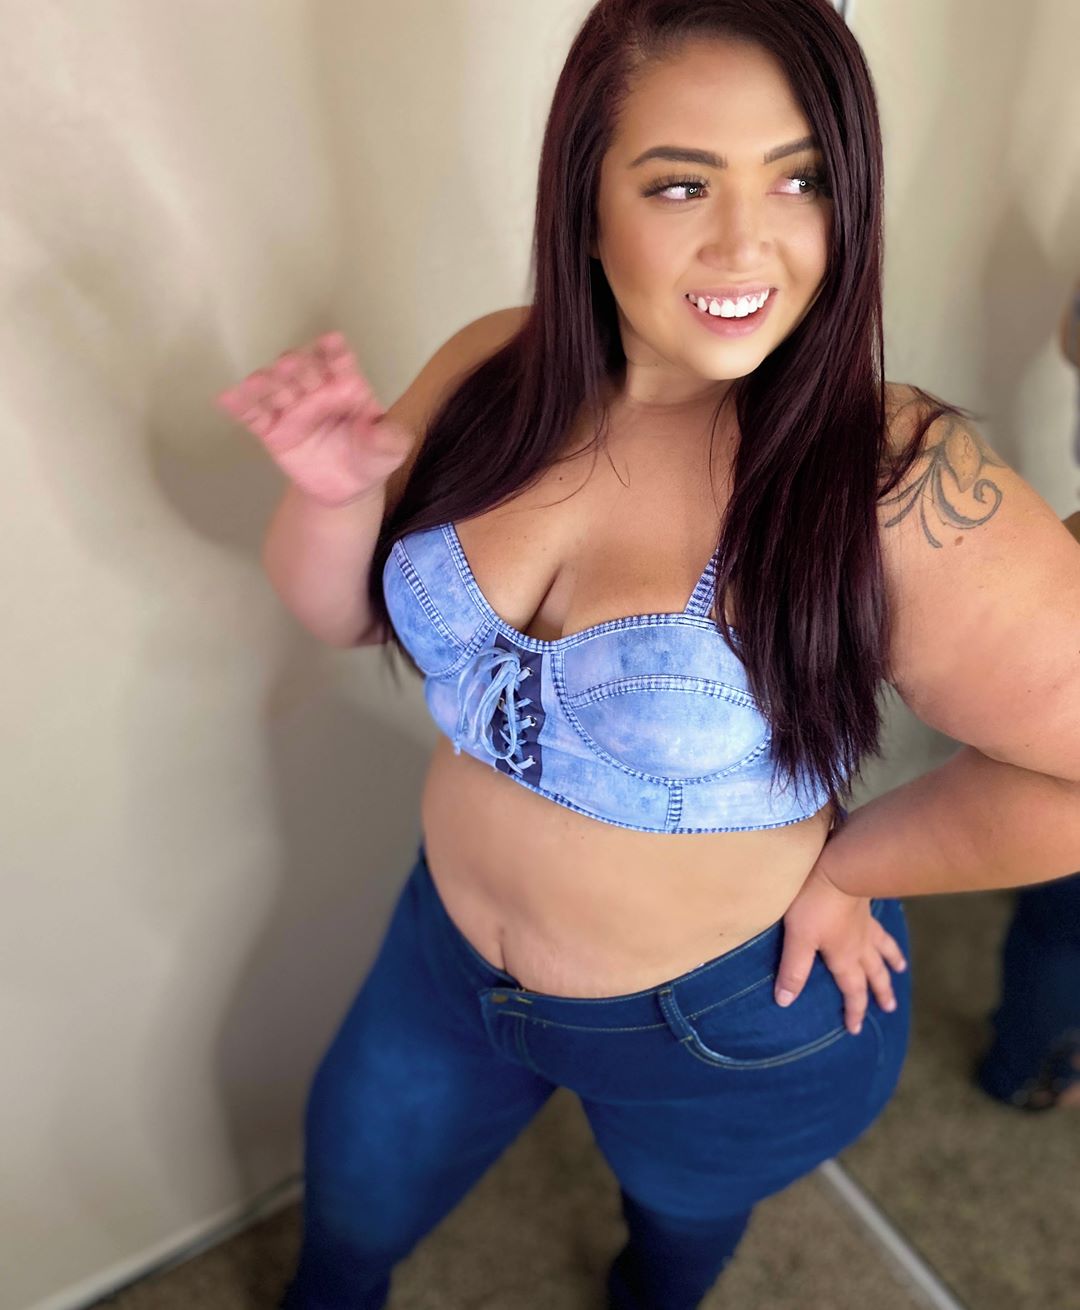 Rosegal - Top mixes Jeans!⁣
Top: 468838305⁣
Jeans: 269645103⁣
Use Code: RGH20 to enjoy 18% off!⁣
#rosegal #plussizefashion #Rosegalcurvygirl #curvygirl⁣
Note: How to find the item, please check the st...